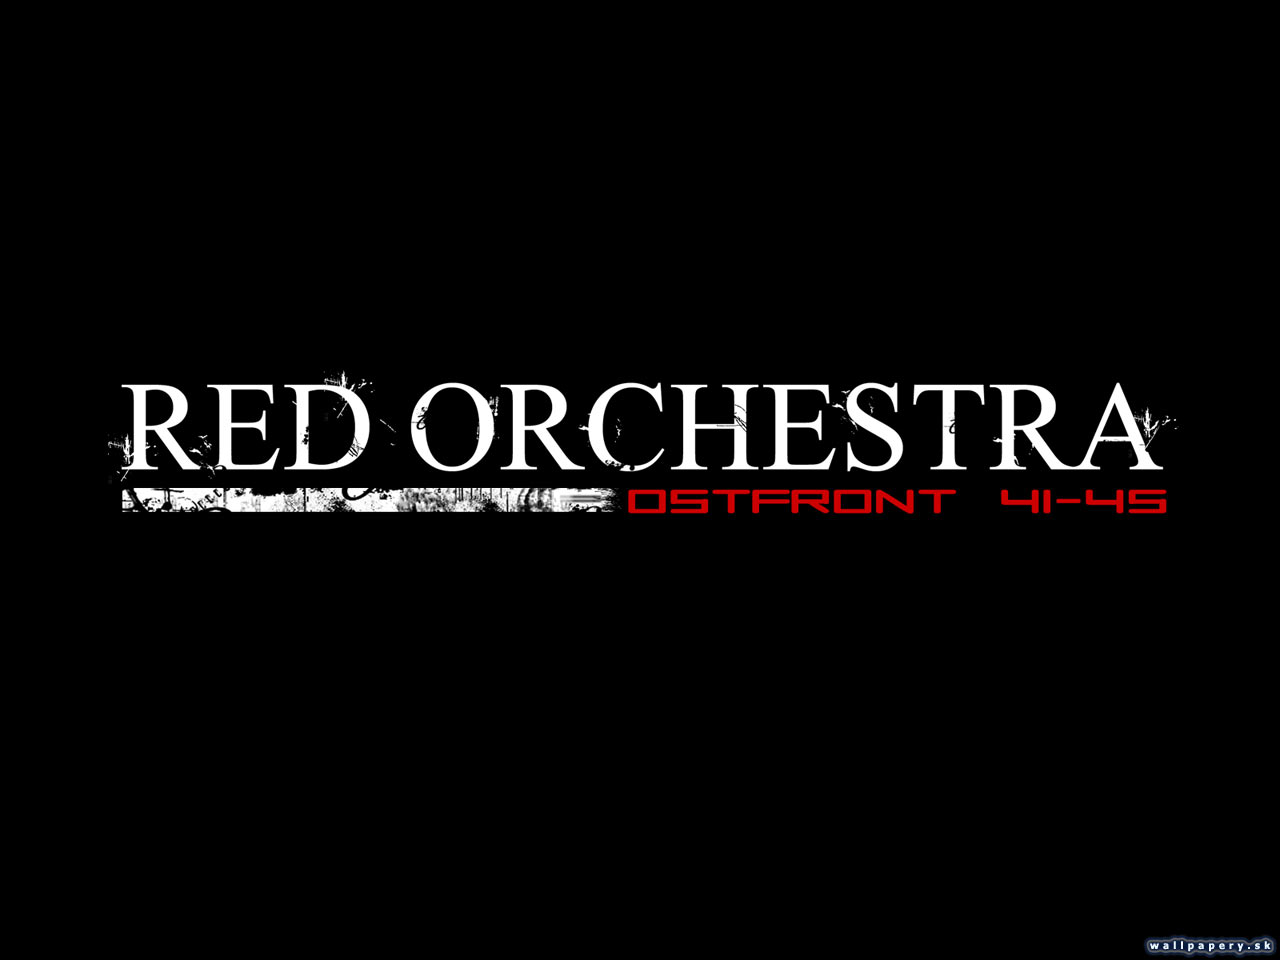 Red Orchestra: Ostfront 41-45 - wallpaper 5